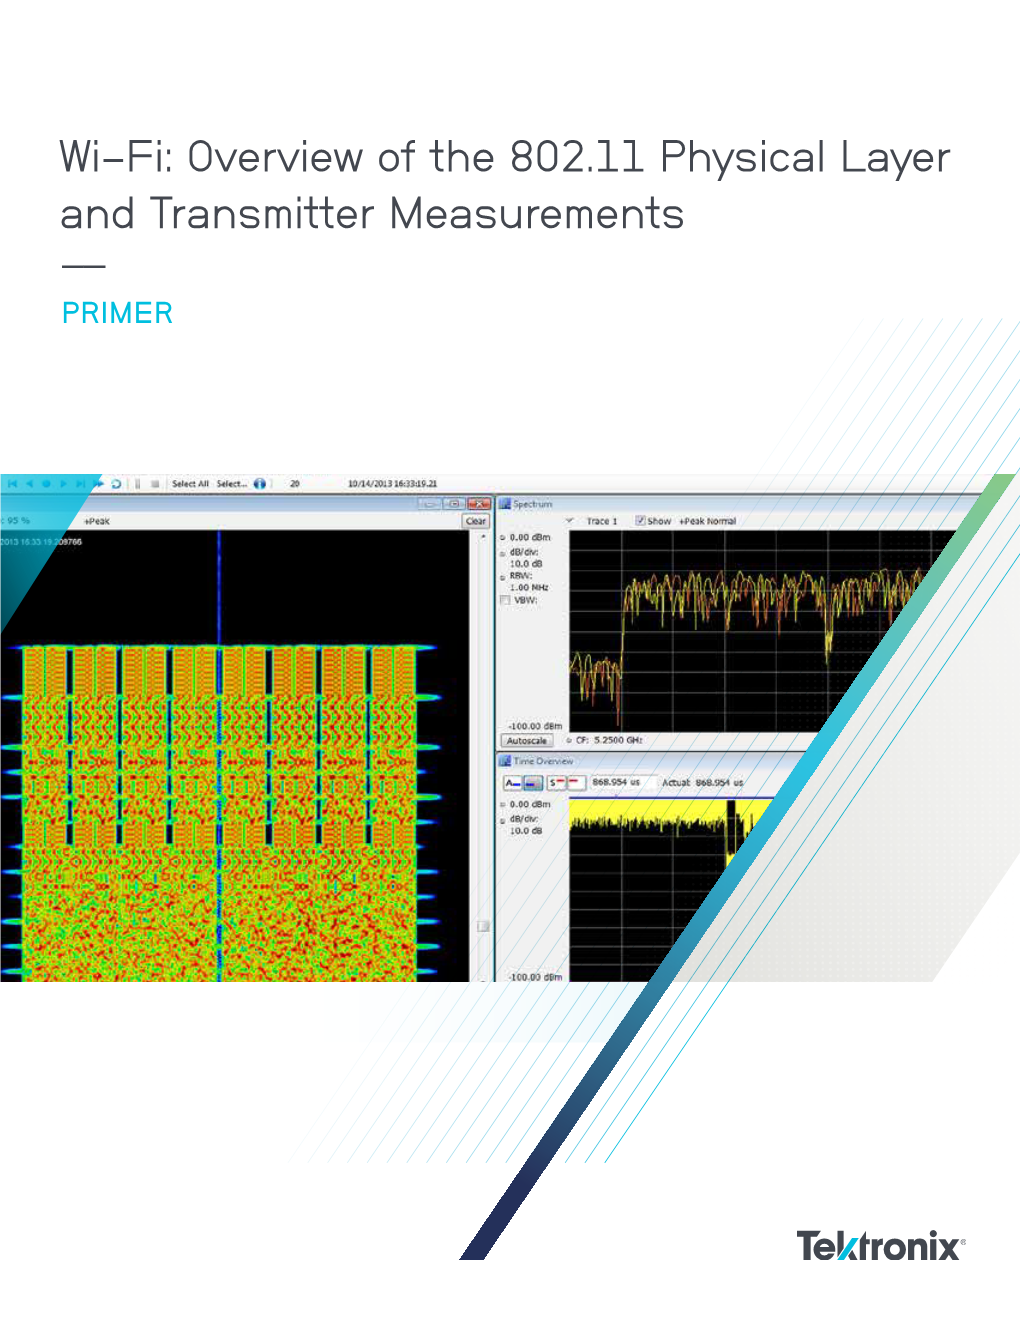 Wi-Fi: Overview of the 802.11 Physical Layer and Transmitter Measurements –– PRIMER Primer